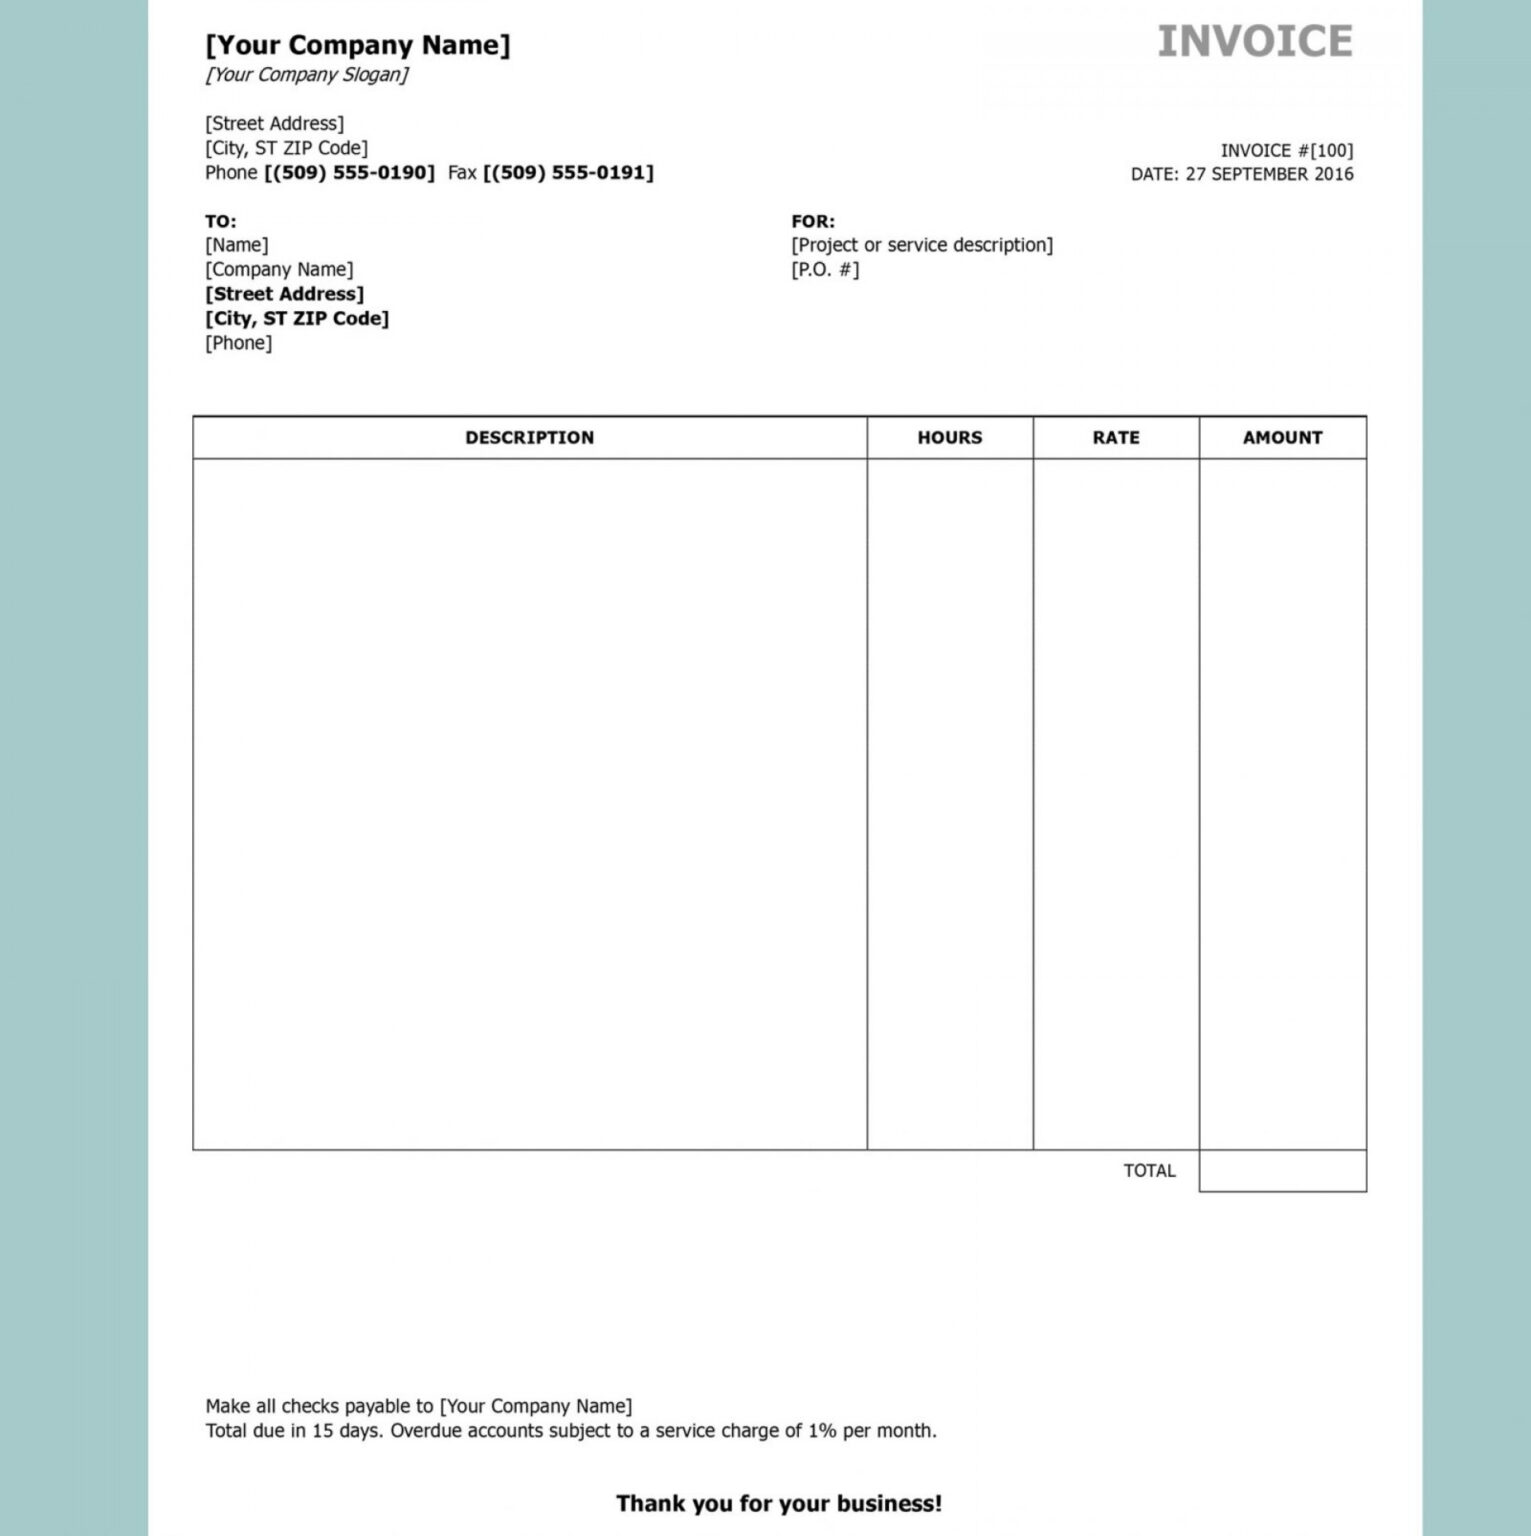 Invoice Template Create And Send Free Invoices Instantly In Invoice